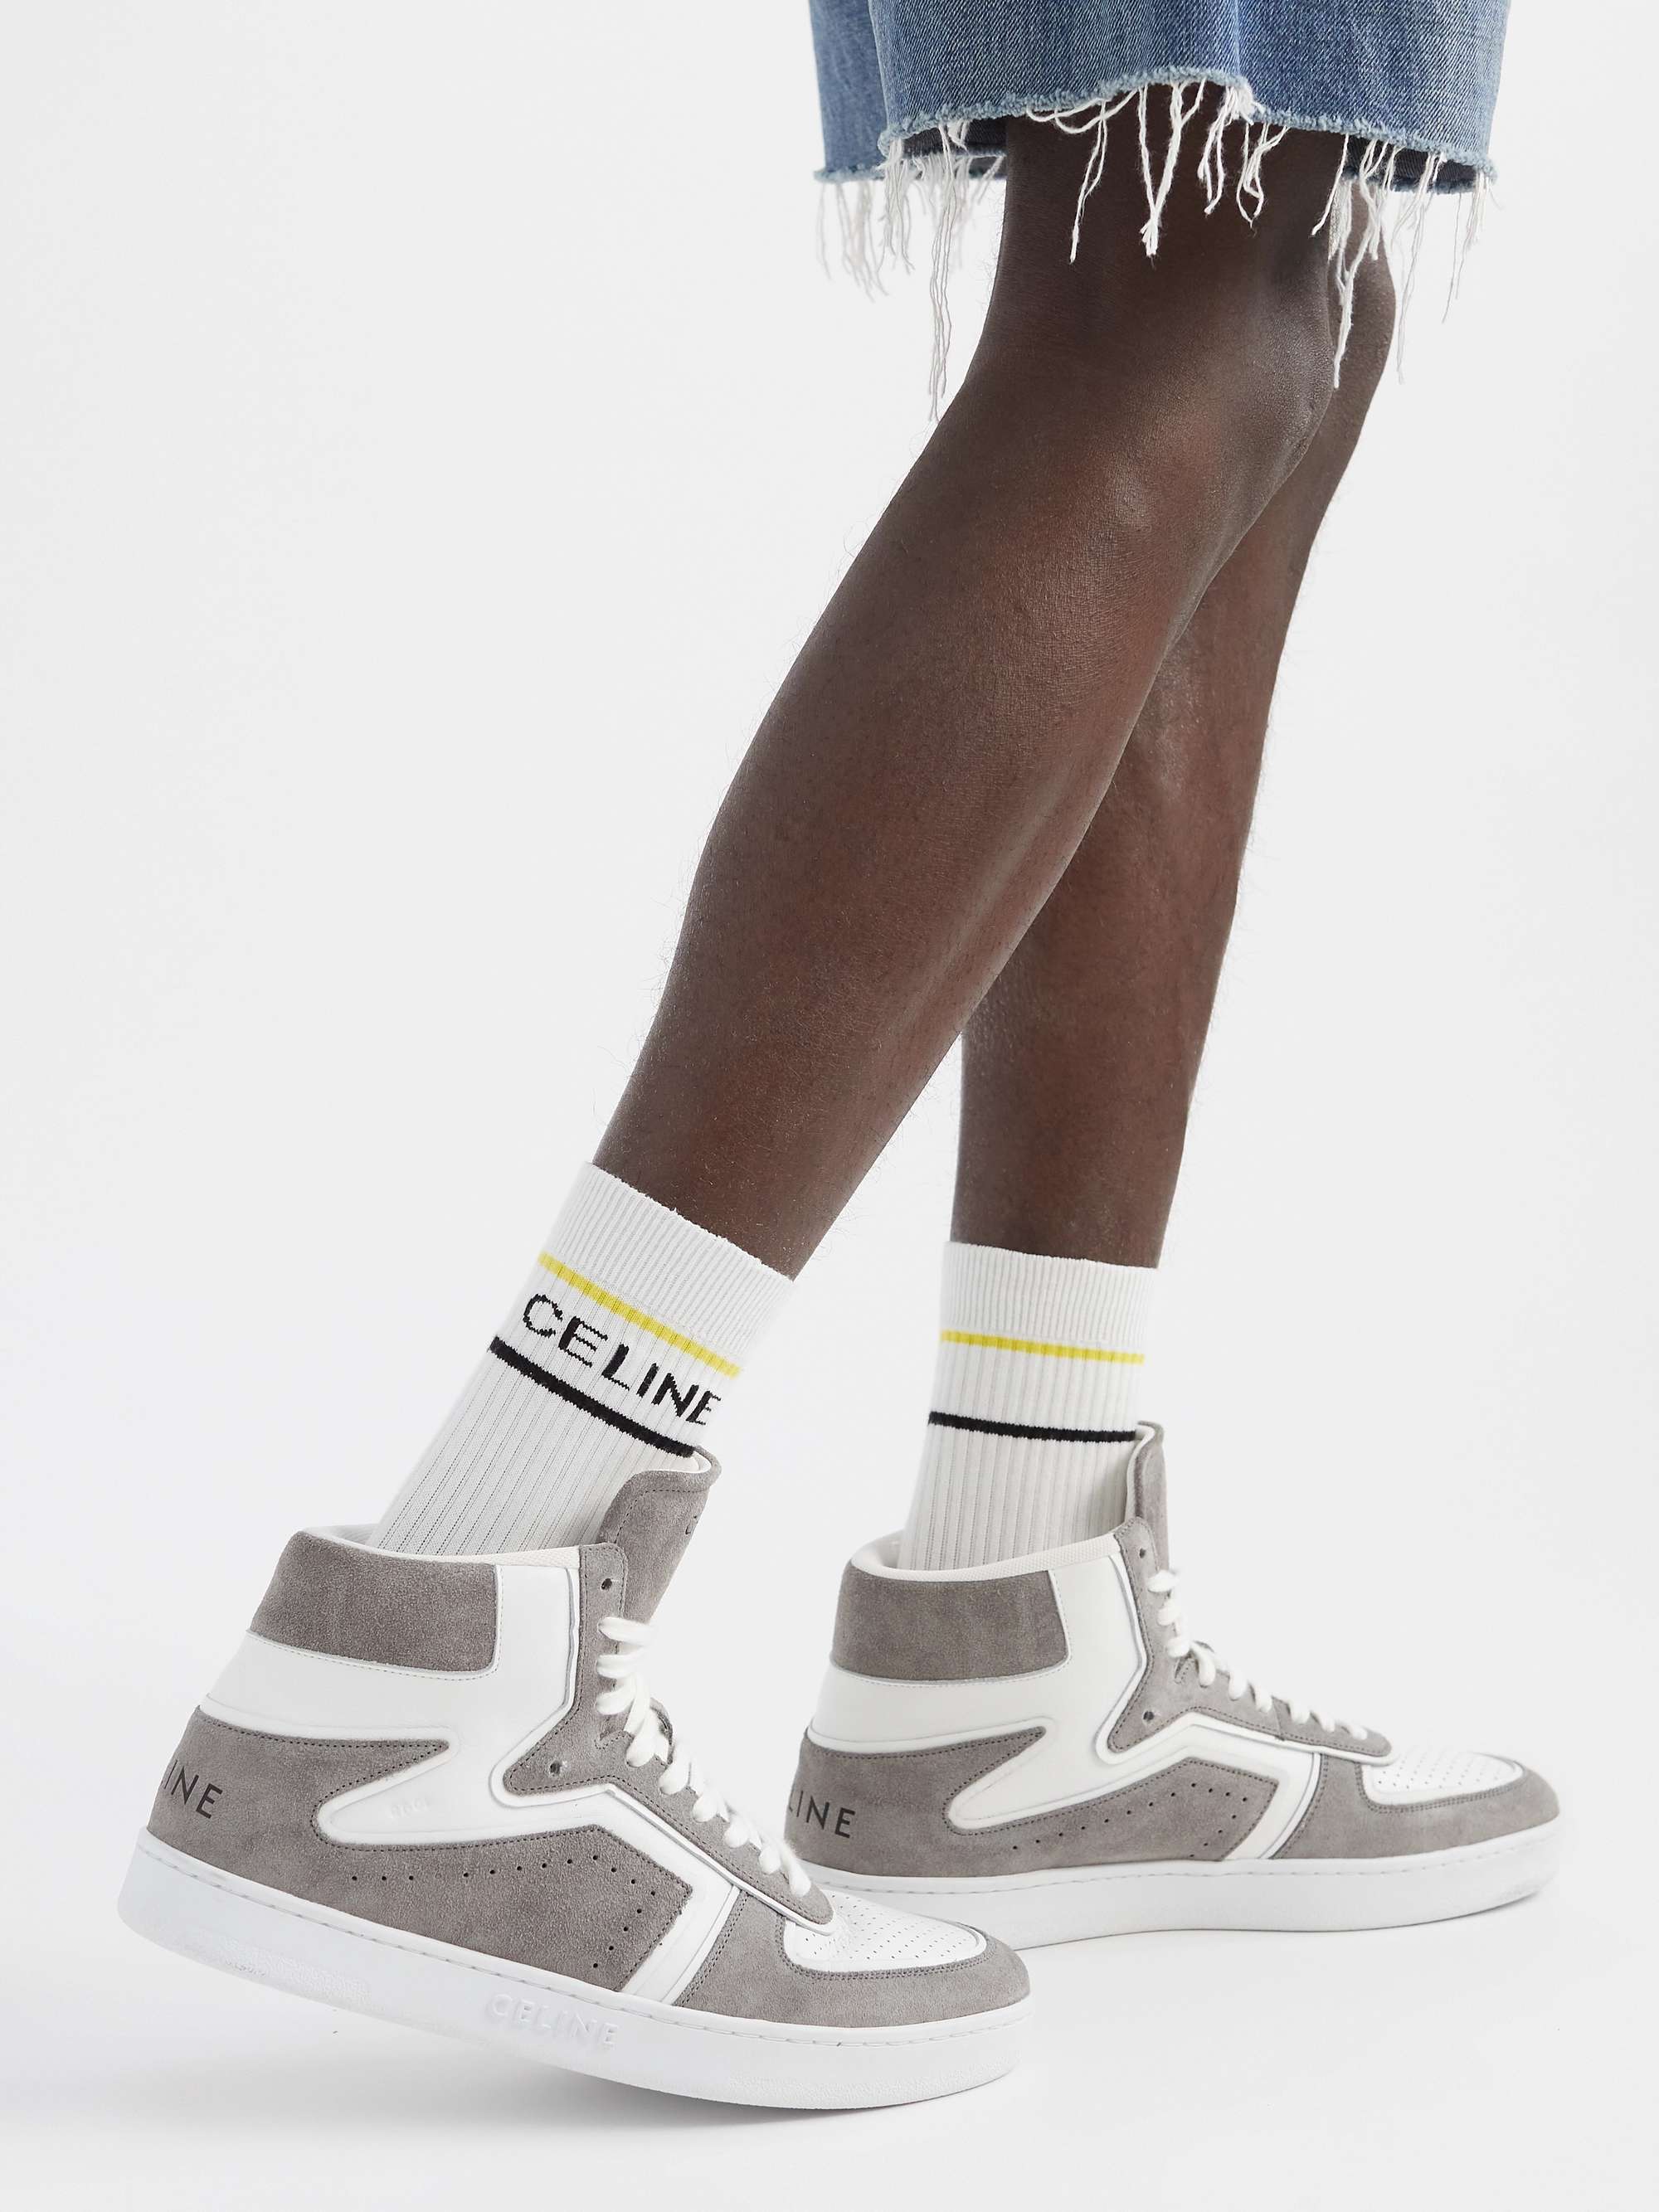 CELINE HOMME Z Suede and Leather High-Top Sneakers